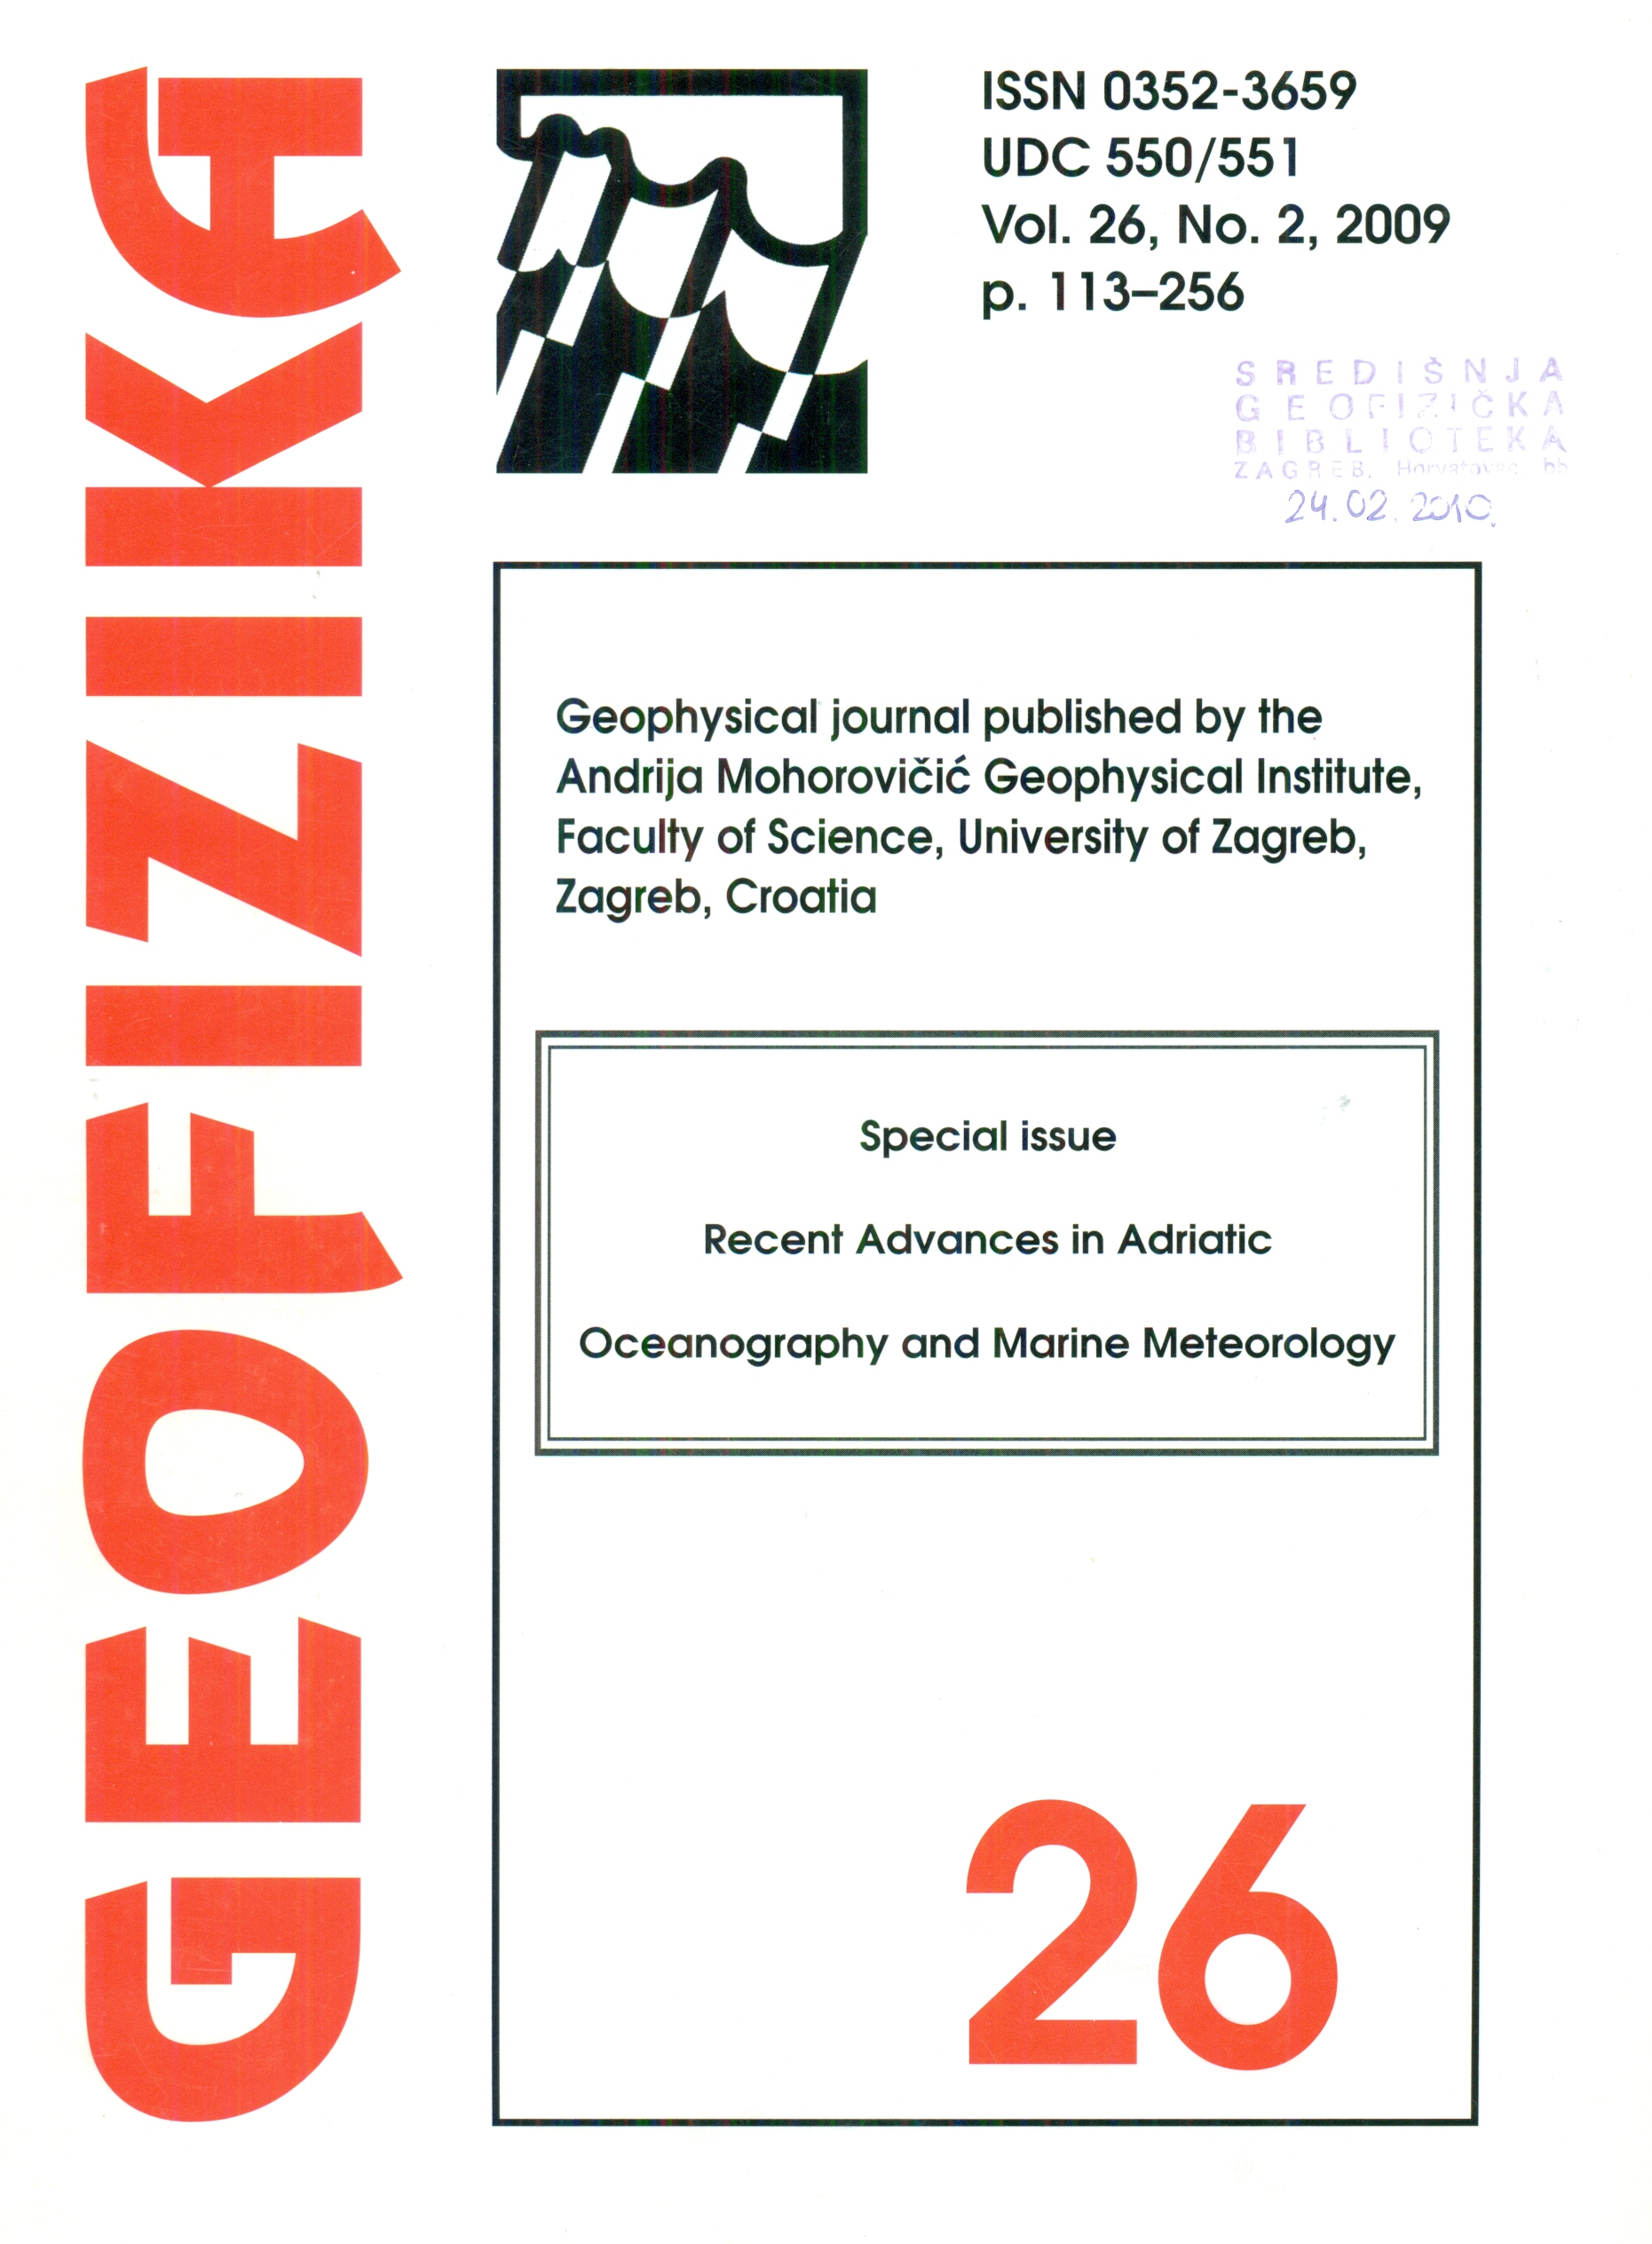 					View Vol. 26 No. 2 (2009): Recent Advances in Adriatic Oceanography and Marine Meteorology
				